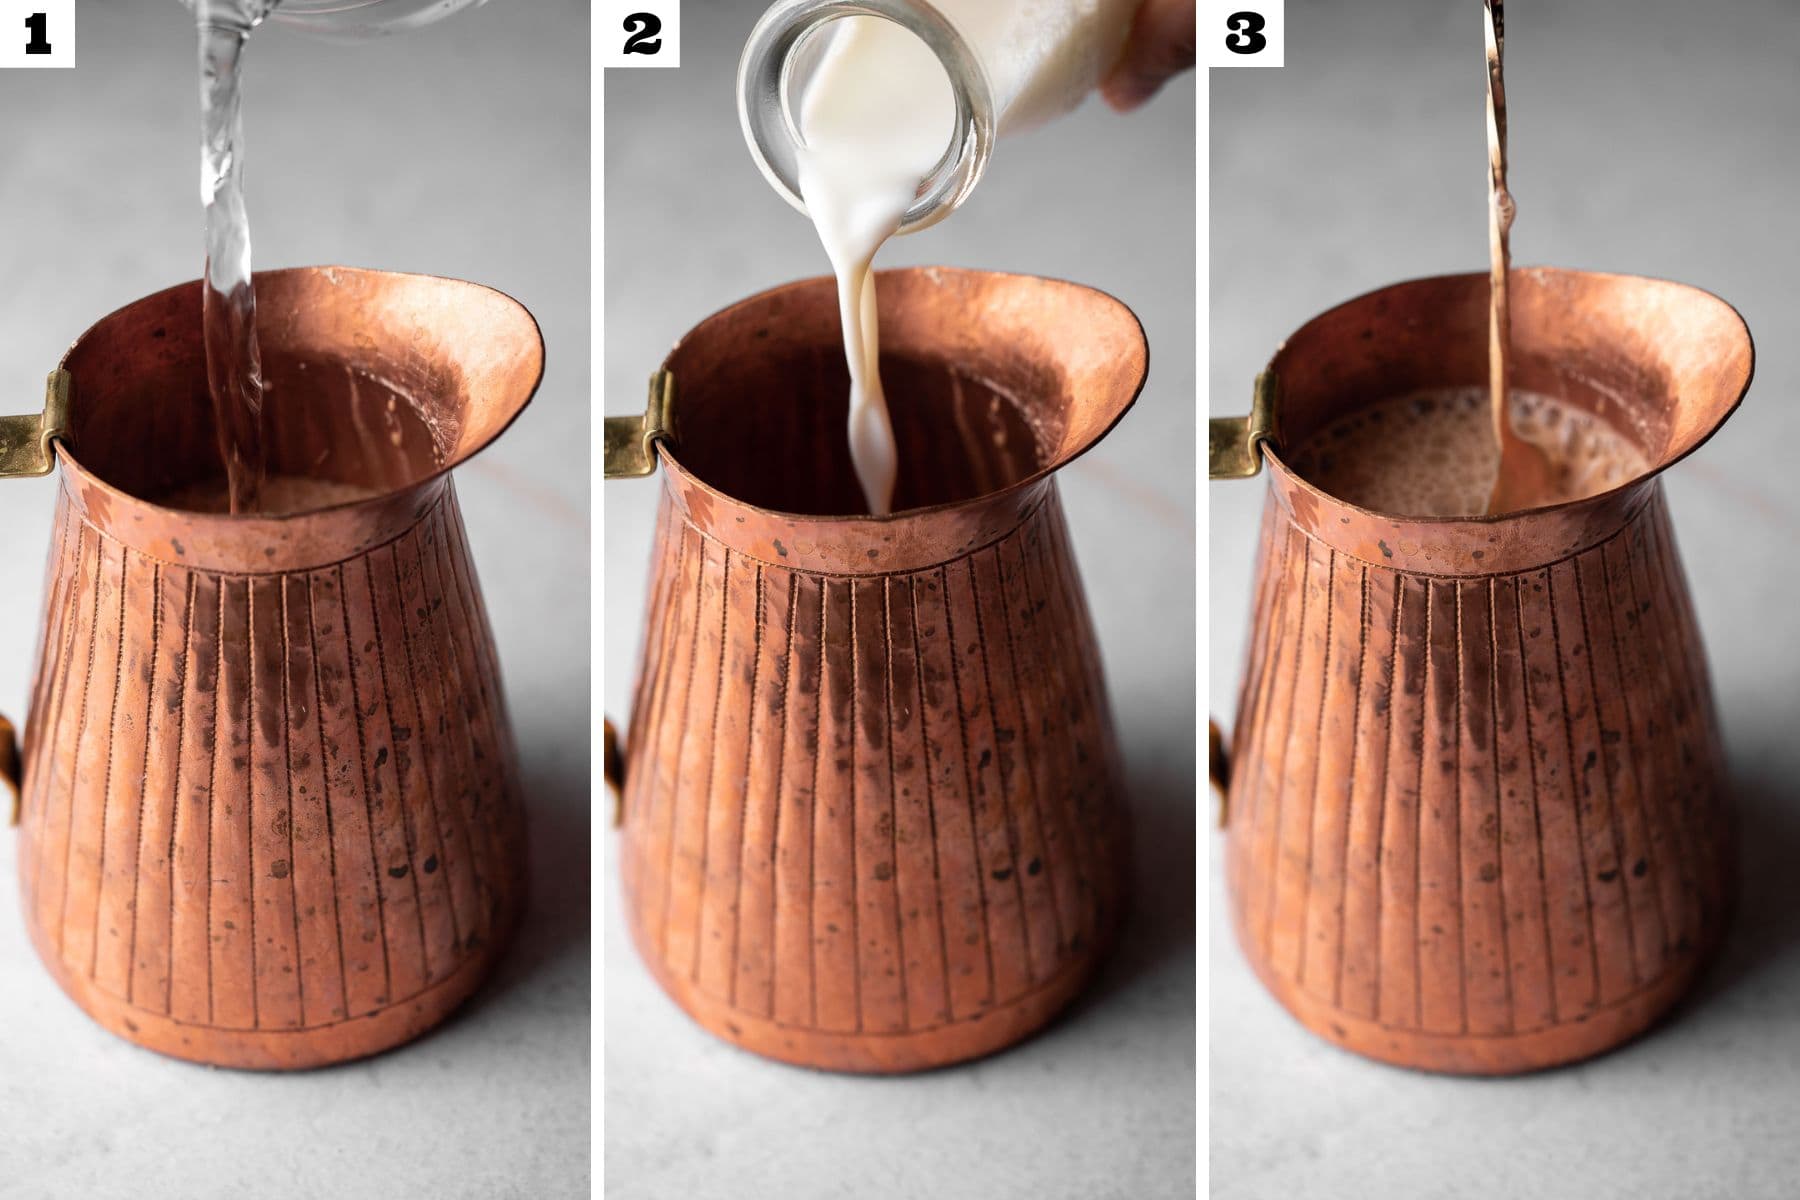 Collage of adding water and milk into a copper pitcher and stirring it with a metal spoon.